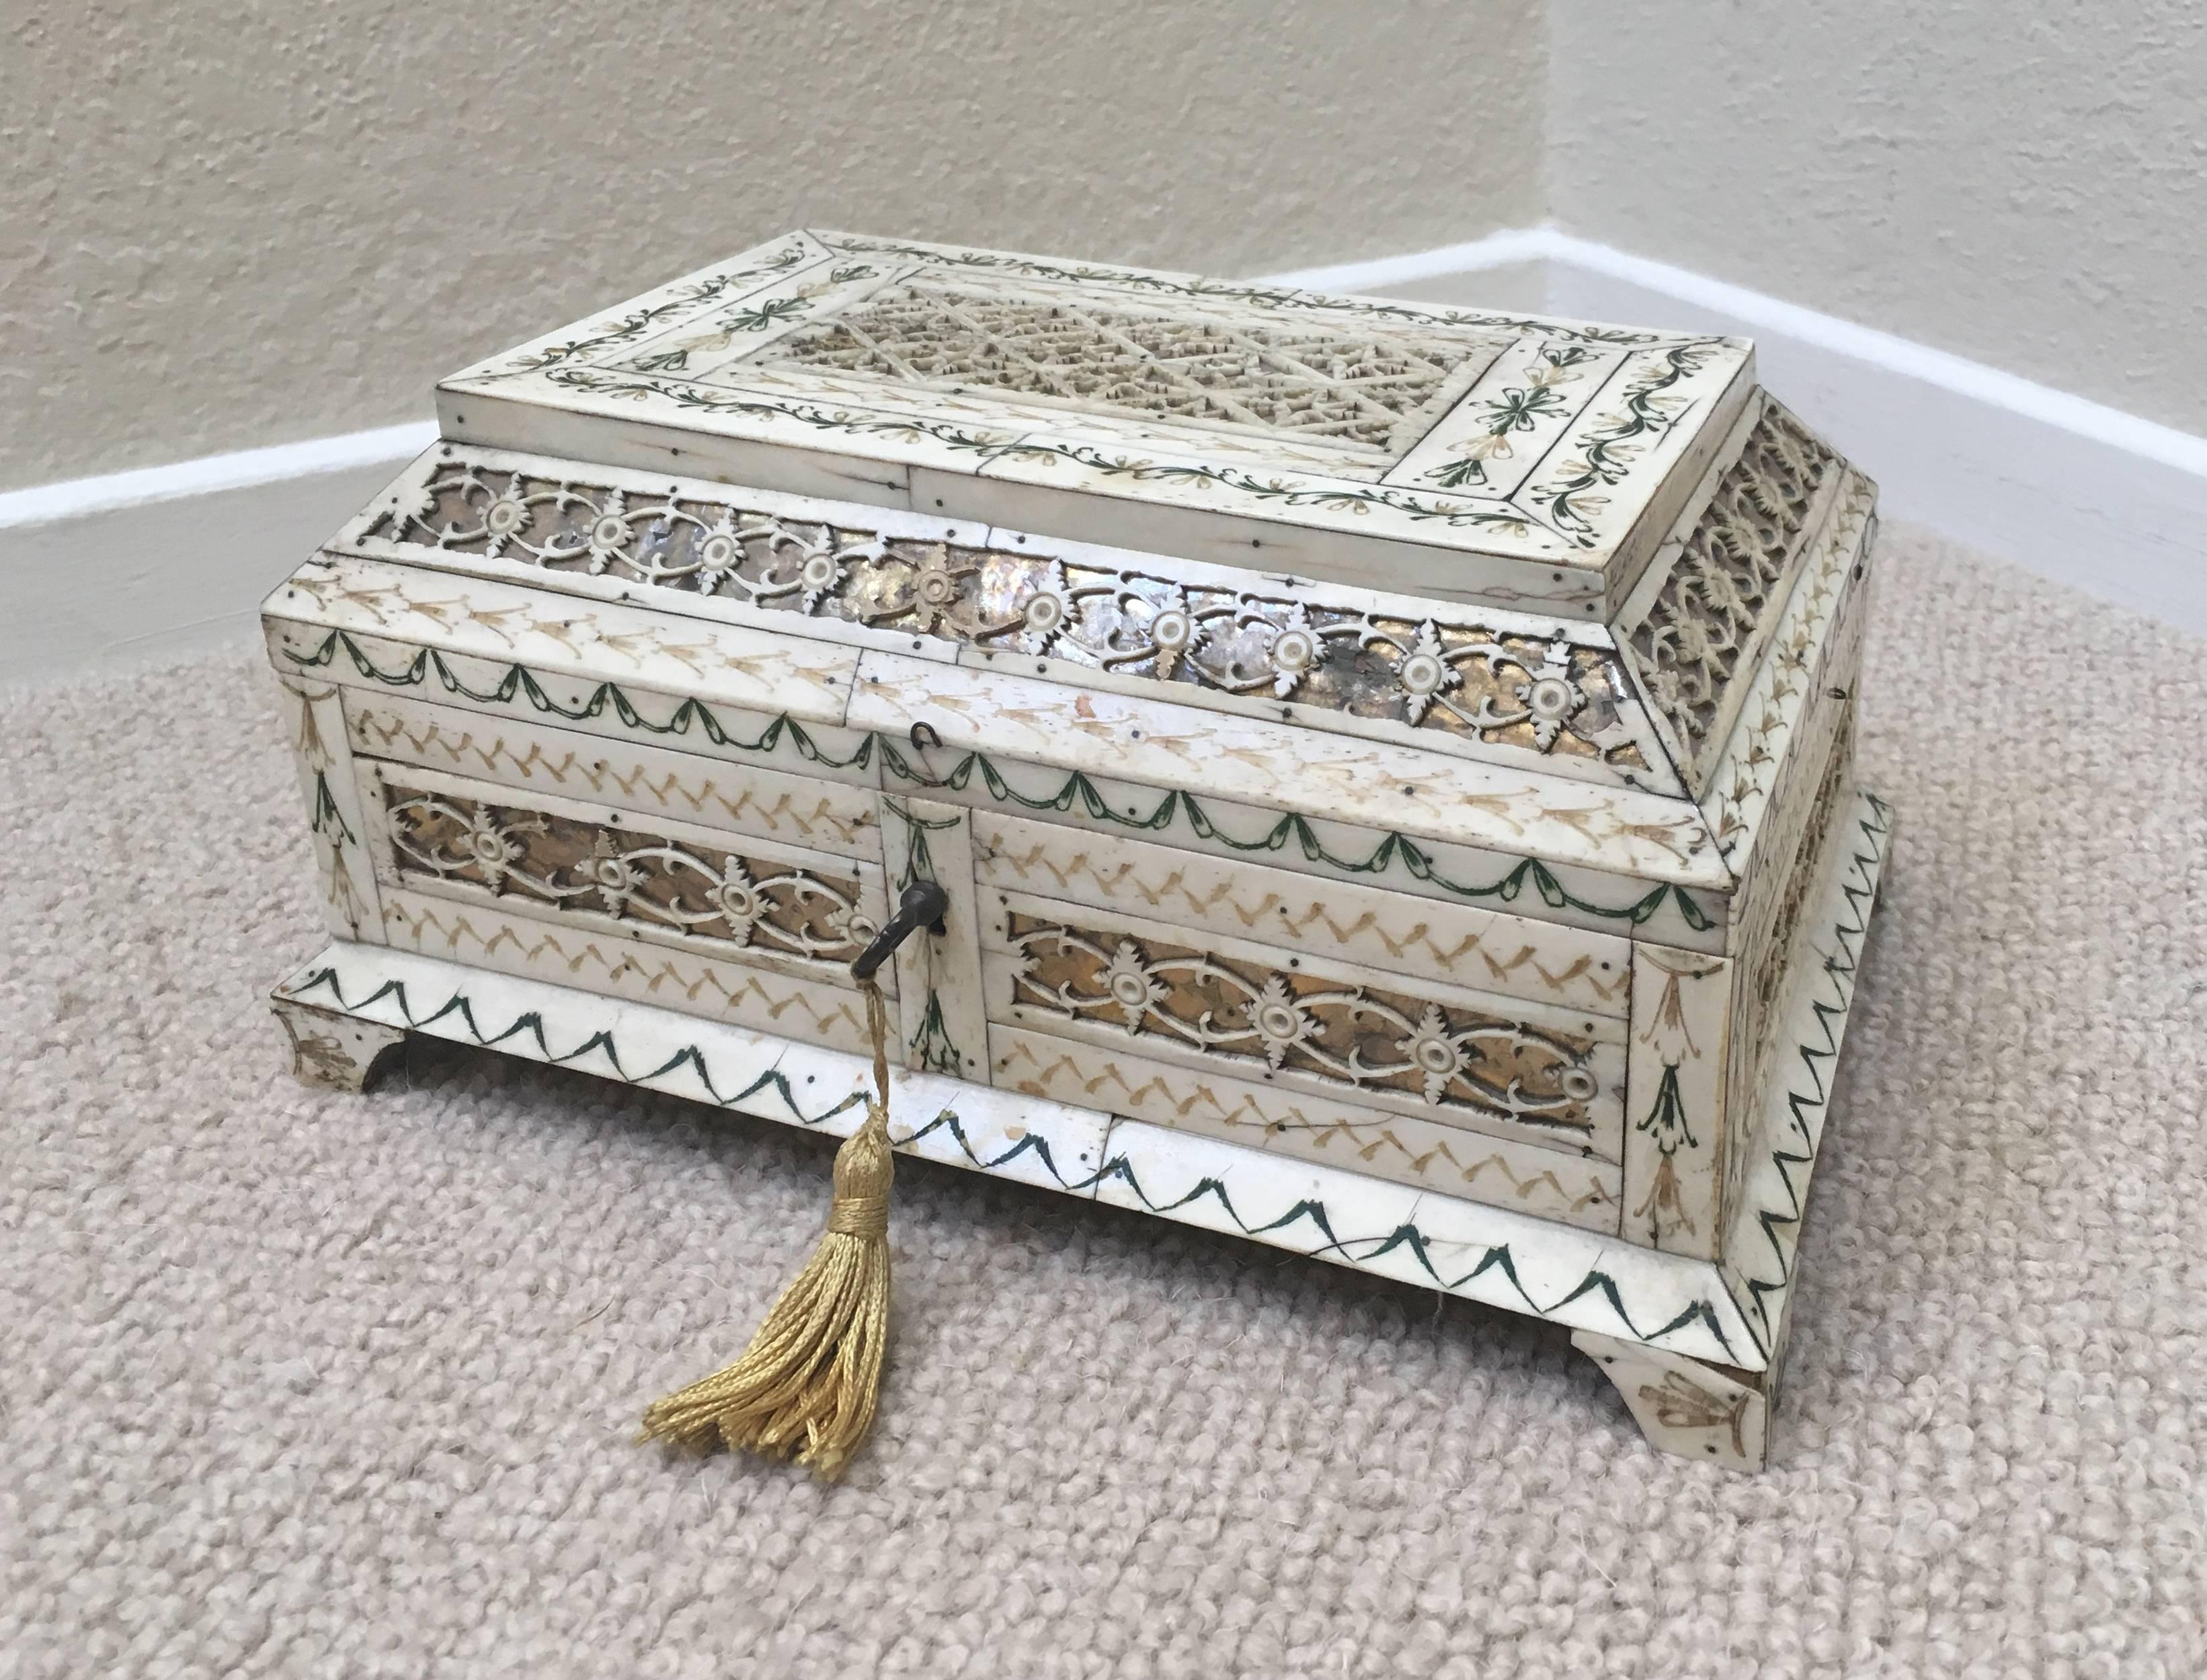 Early 19th century Russian stained and hand-carved Bone Table Casket Kholmogory Box, veneered with panels of foliate engraved stained bone alternating with geometric and foliate fretwork panels over foil, raised on bracket feet. Including original